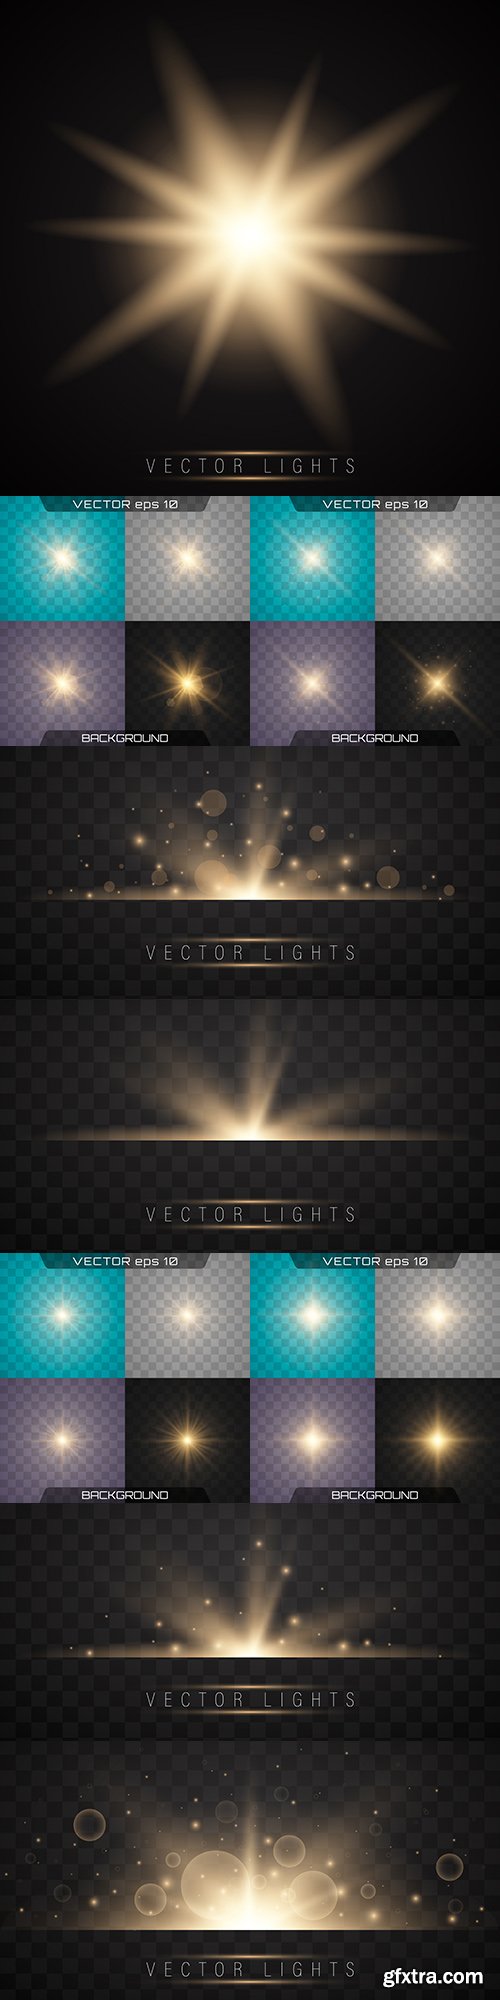 Bright lighting effects collection design illustration 15